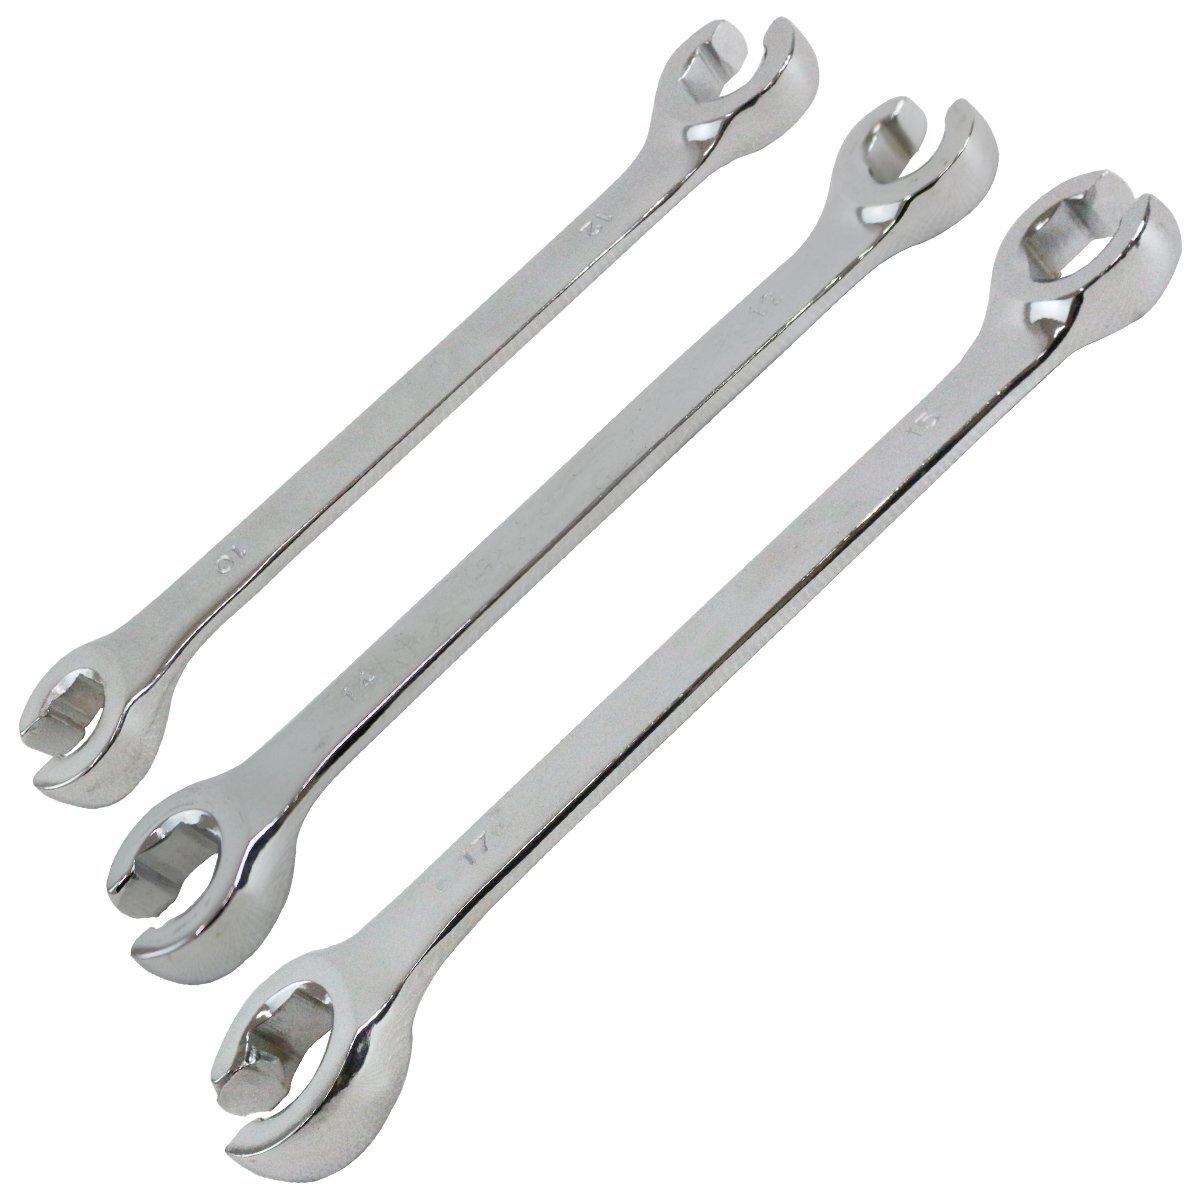 [ mail service correspondence ][3 pcs set ] flair nut wrench 10mm 12mm 14mm 15mm 17mm brake pipe car bike maintenance tool automobile bolt nut 